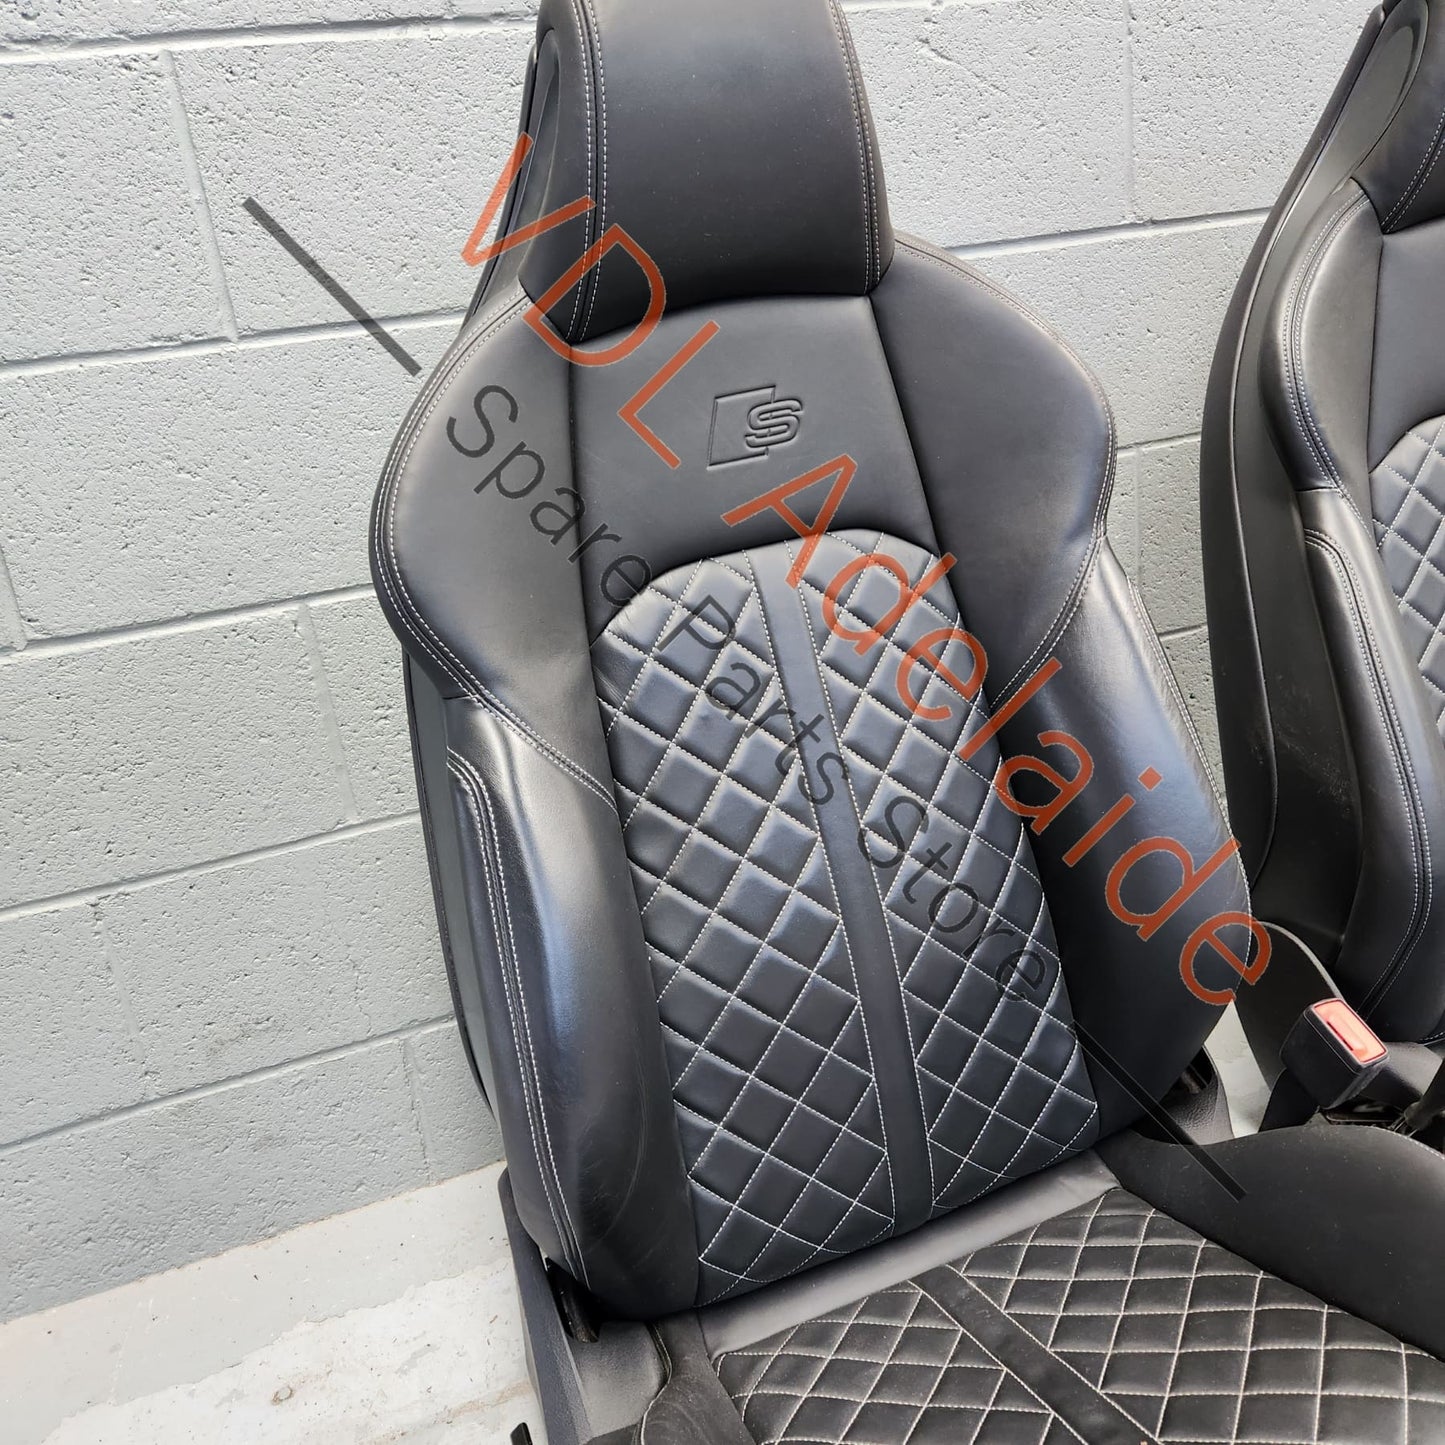    Audi S4 A4 Front Electric & Heated Diamond Stitch Leather Seat Seats Pair